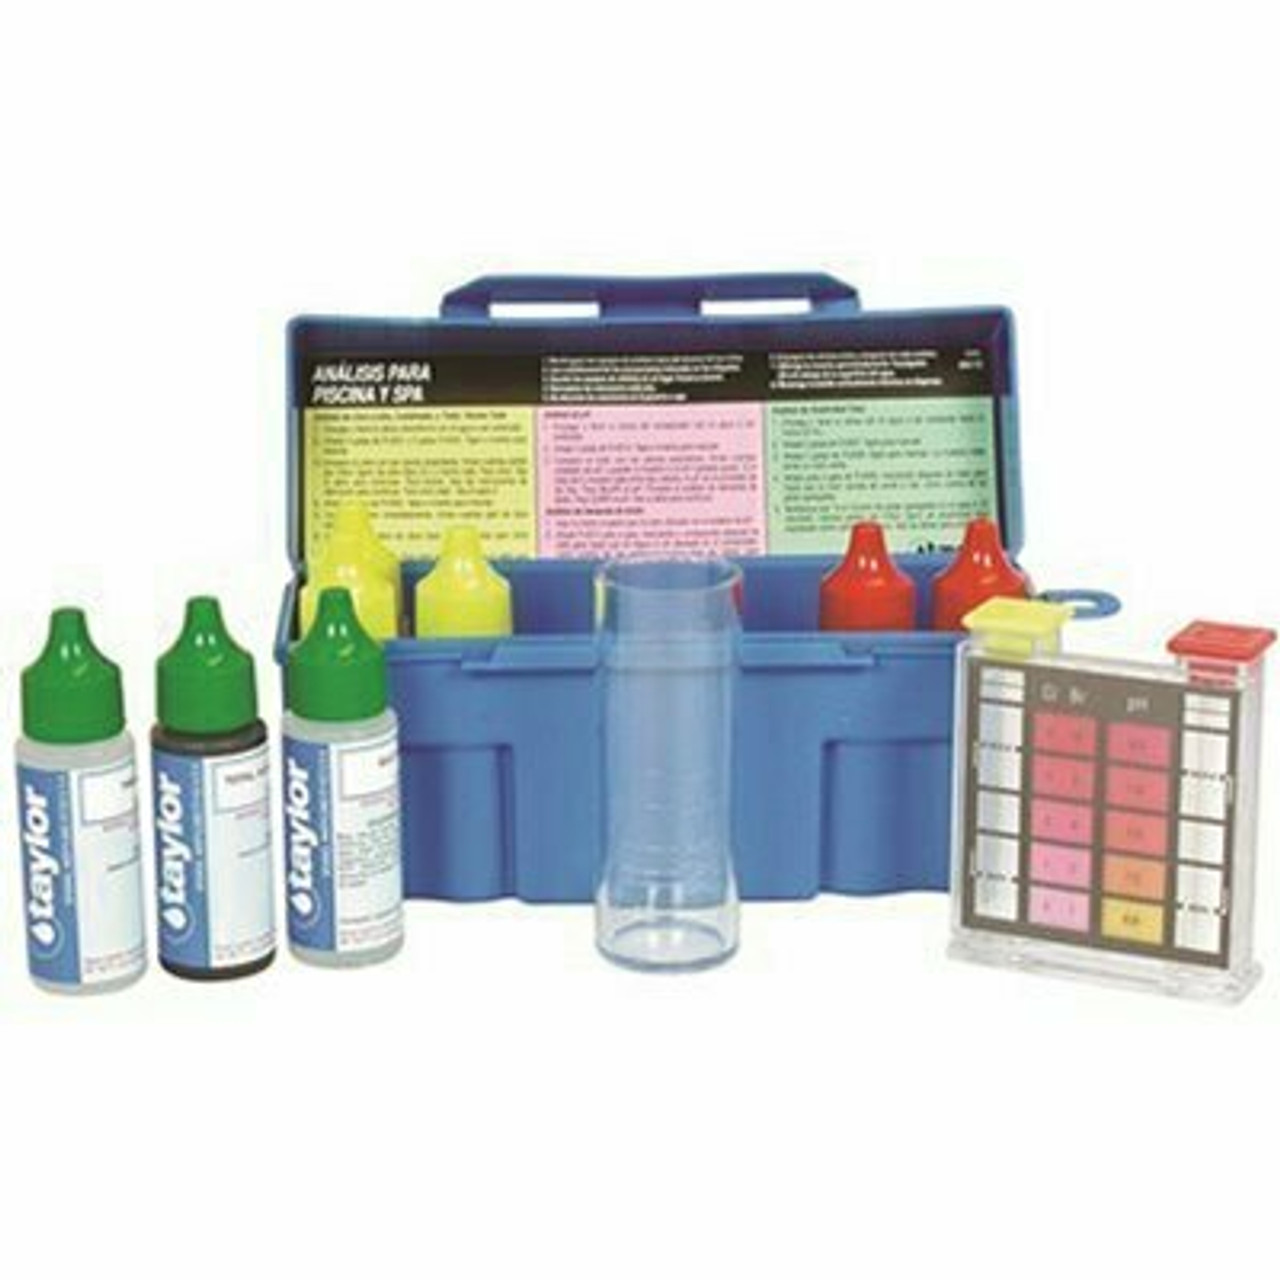 Taylor Sure Check Residential Trouble Shooter Dpd Test Kit K-1004 Chlorine/Bromine